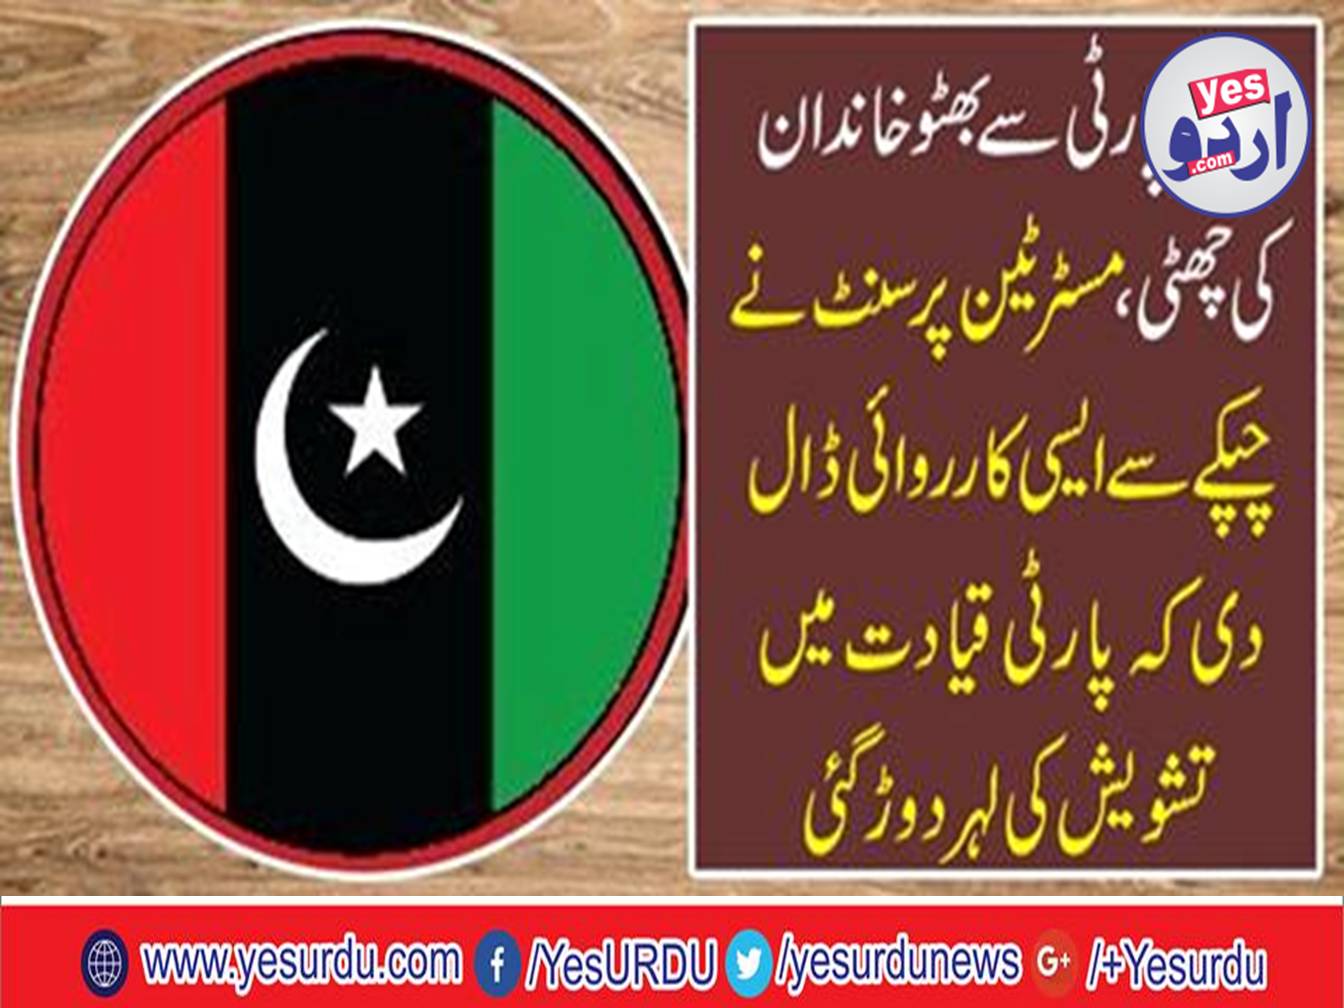 In the general election 2018 elections, no one is involved in the Bhutto community to participants from the PPP